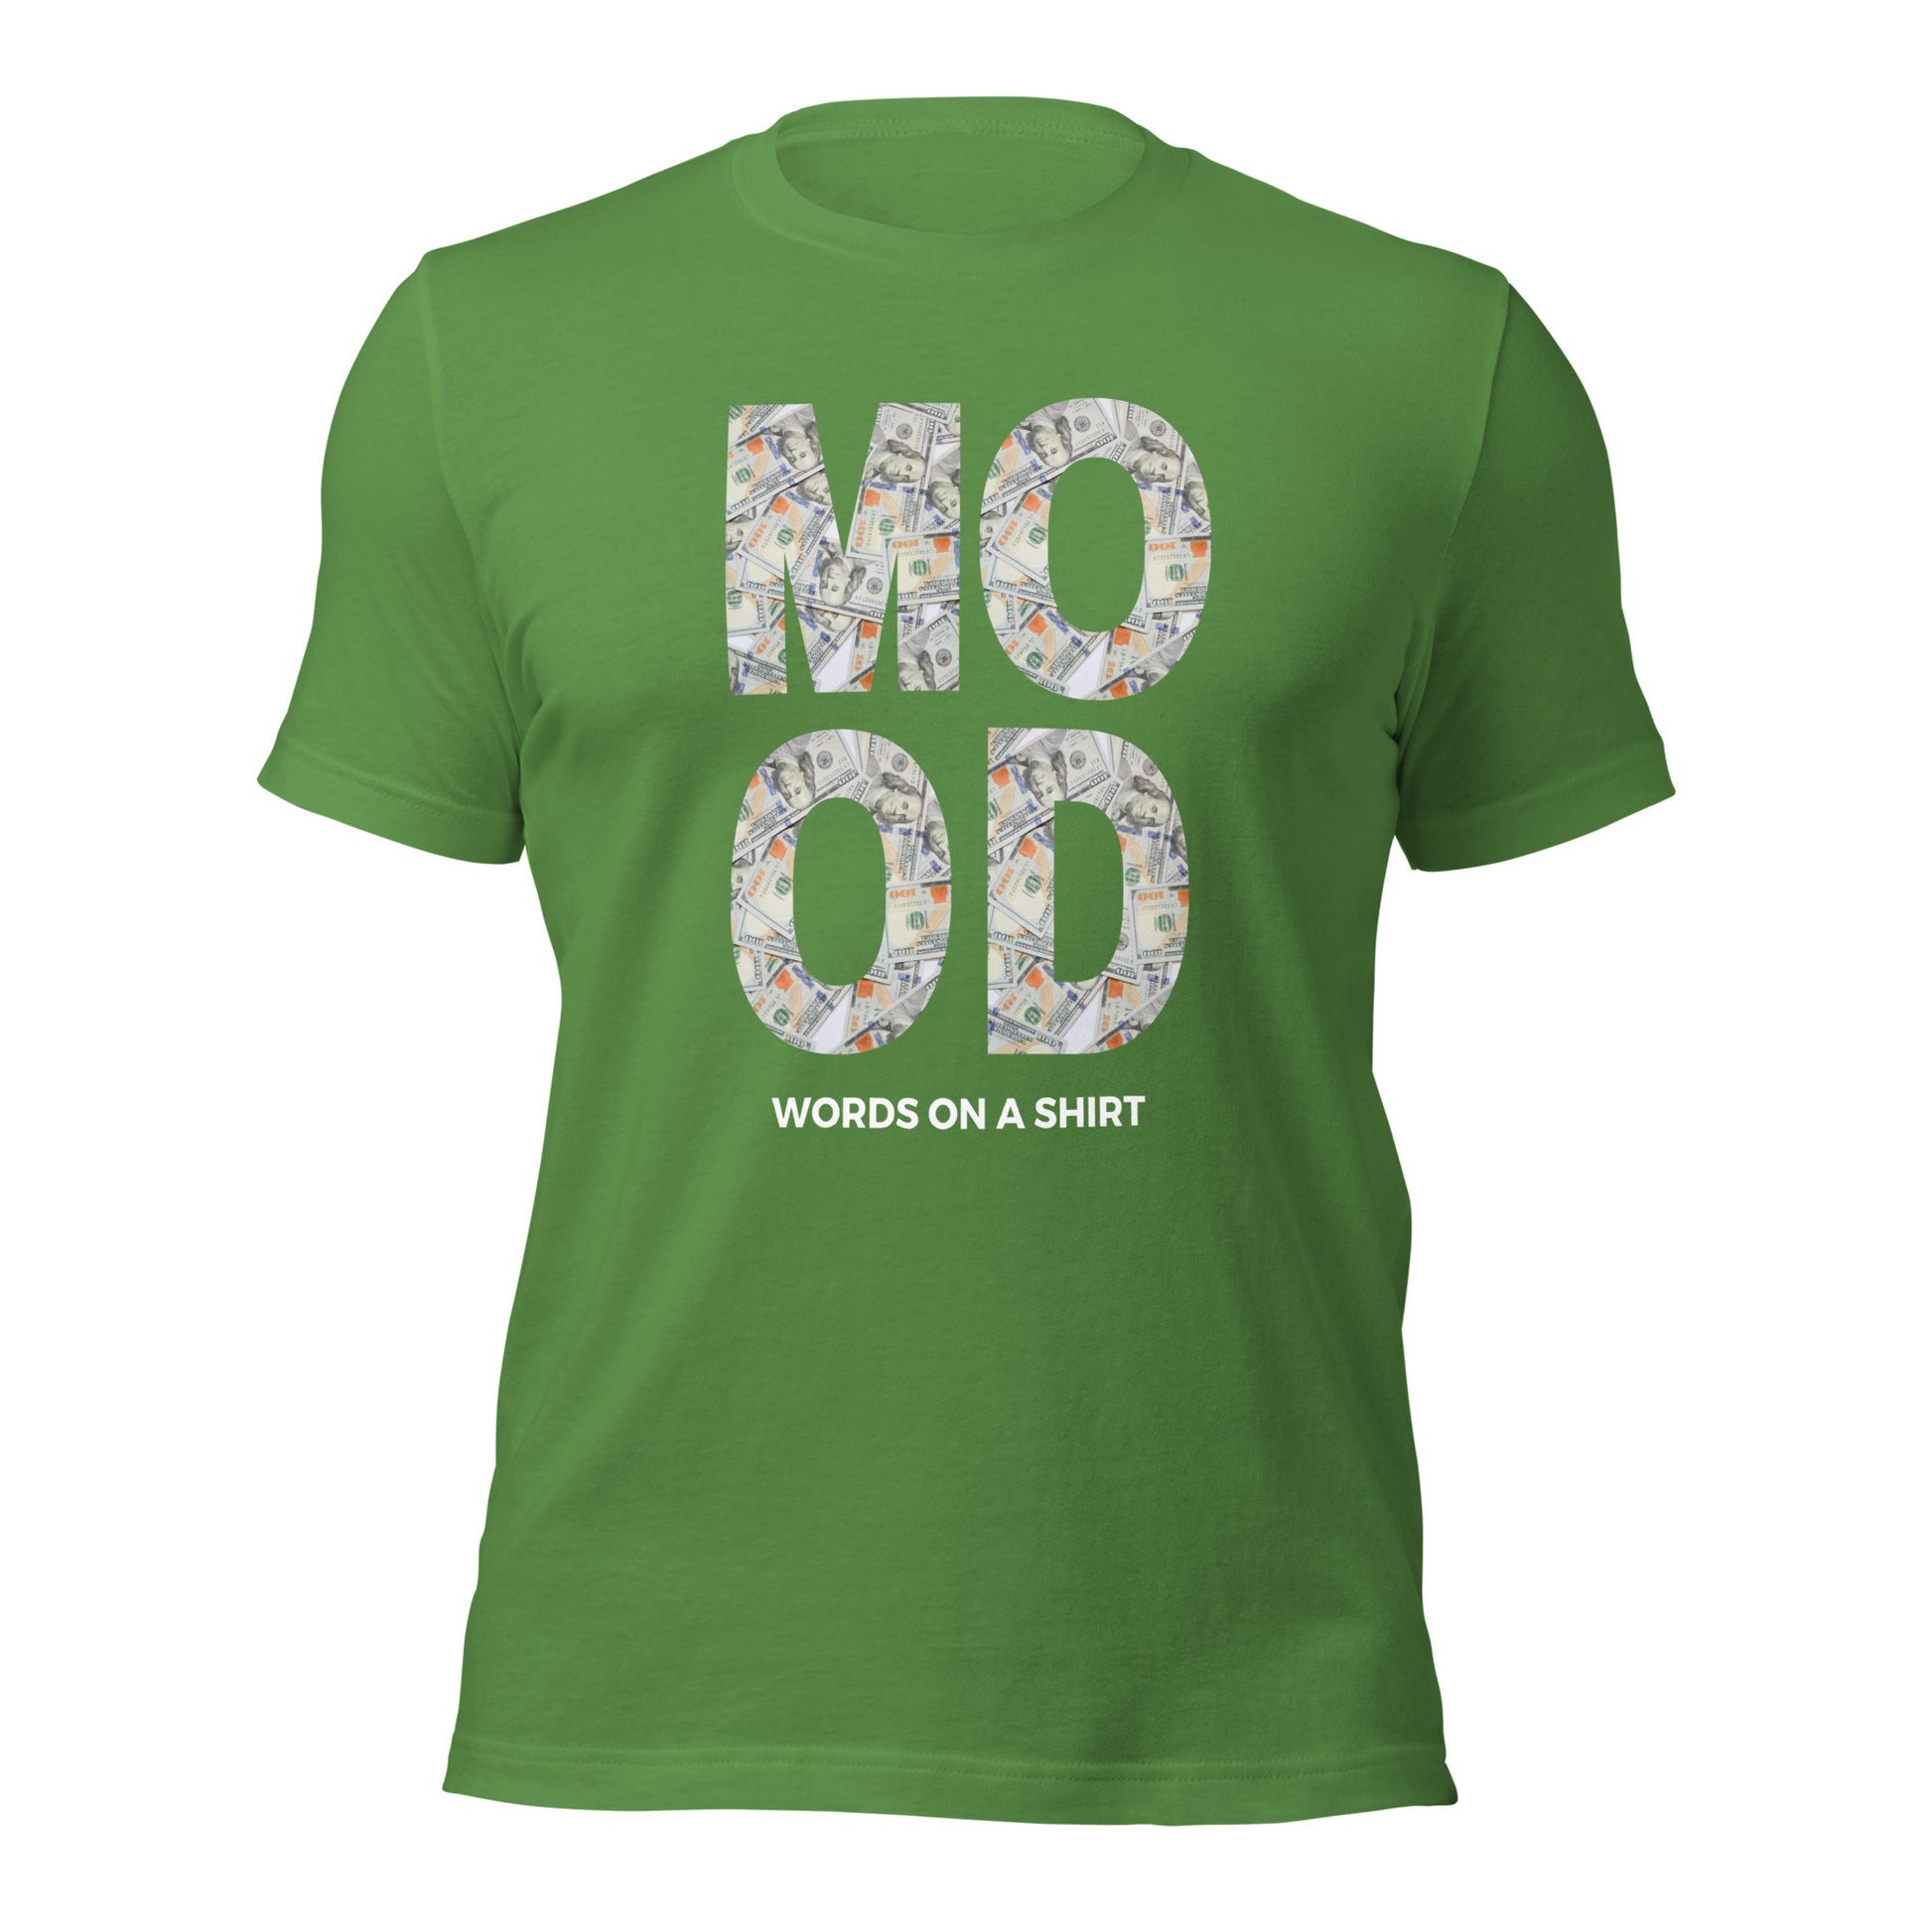 Get ready to flaunt your "money mood" with our Unisex T-Shirt! Soft, lightweight, and stretchy, it's everything you've dreamed of and more. Comfortable, flattering, and fun - perfect for showing off your playful side. 